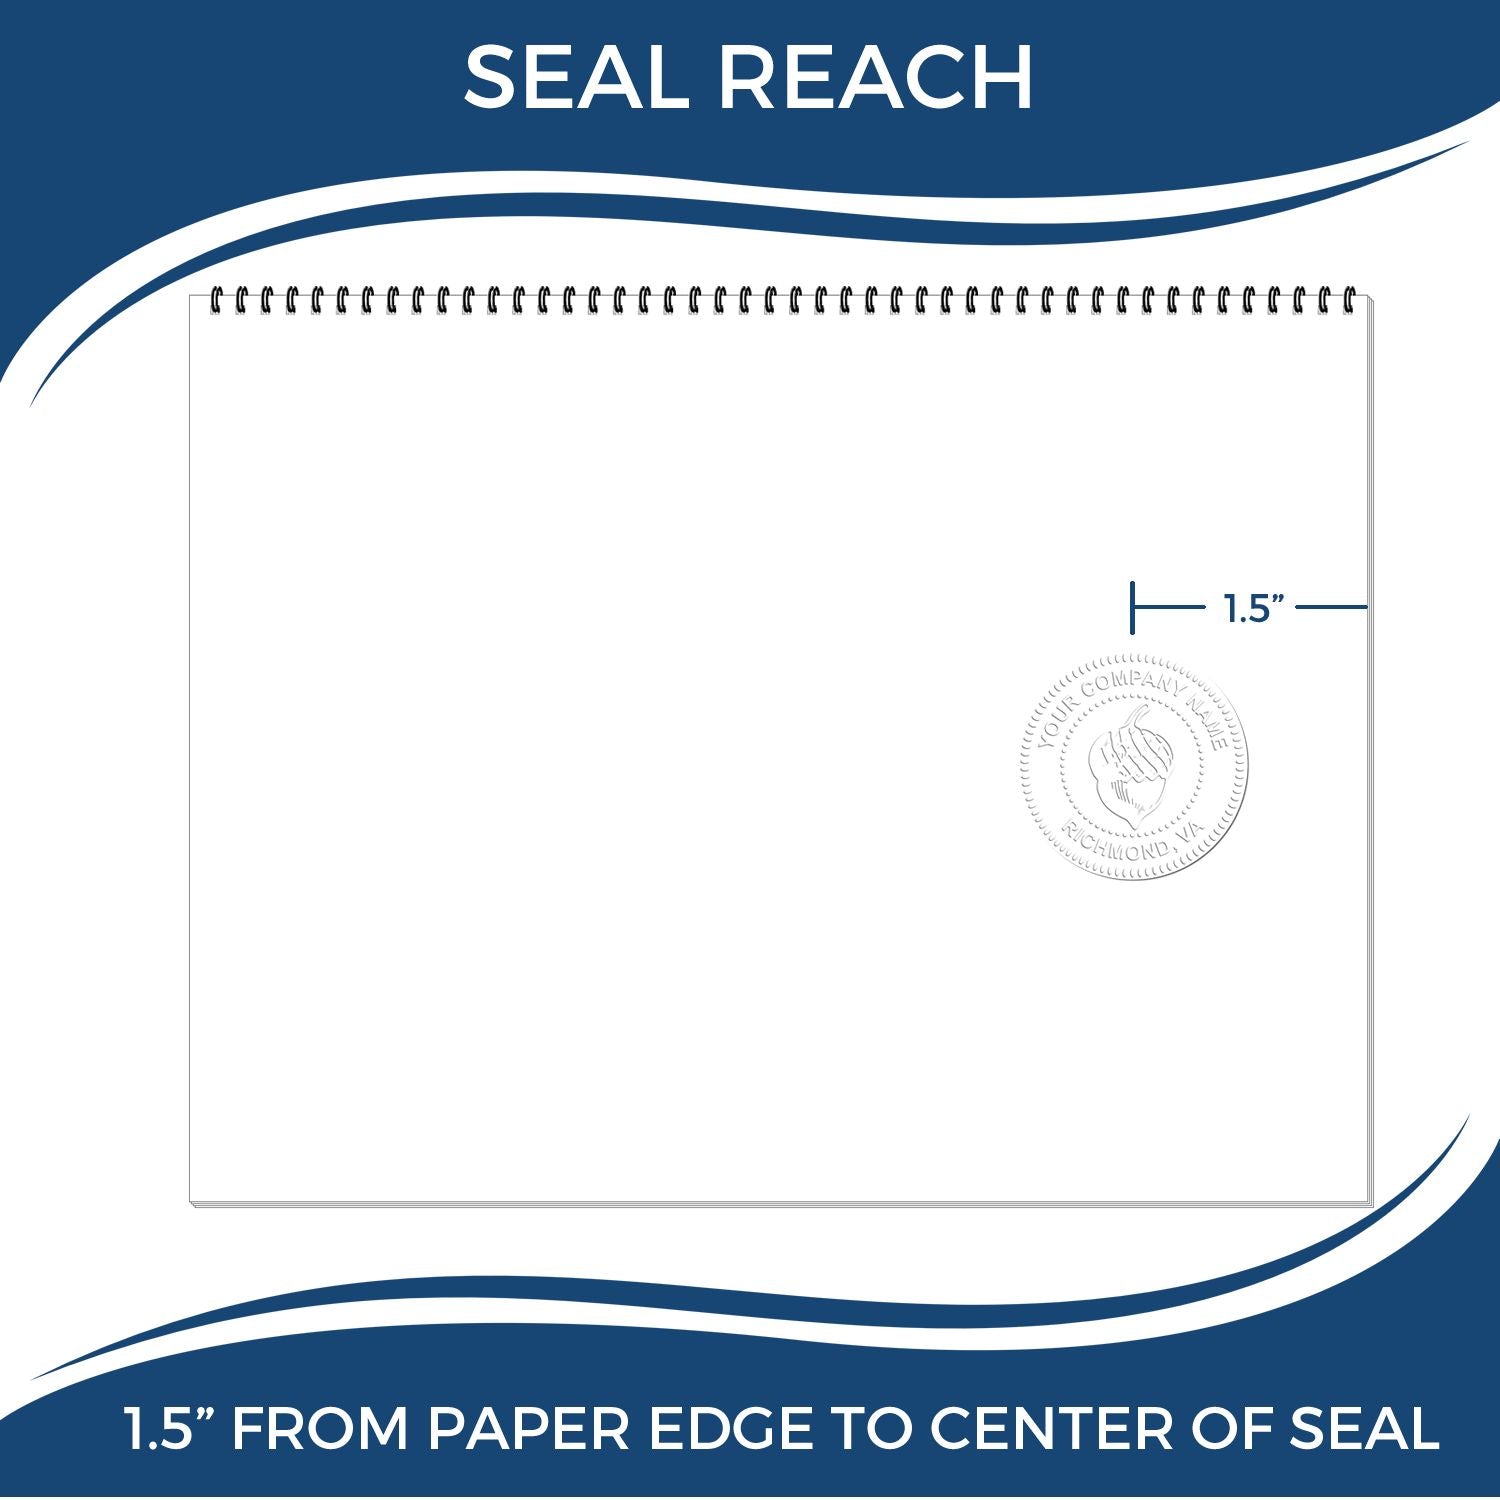 An infographic showing the seal reach which is represented by a ruler and a miniature seal image of the State of South Dakota Architectural Seal Embosser